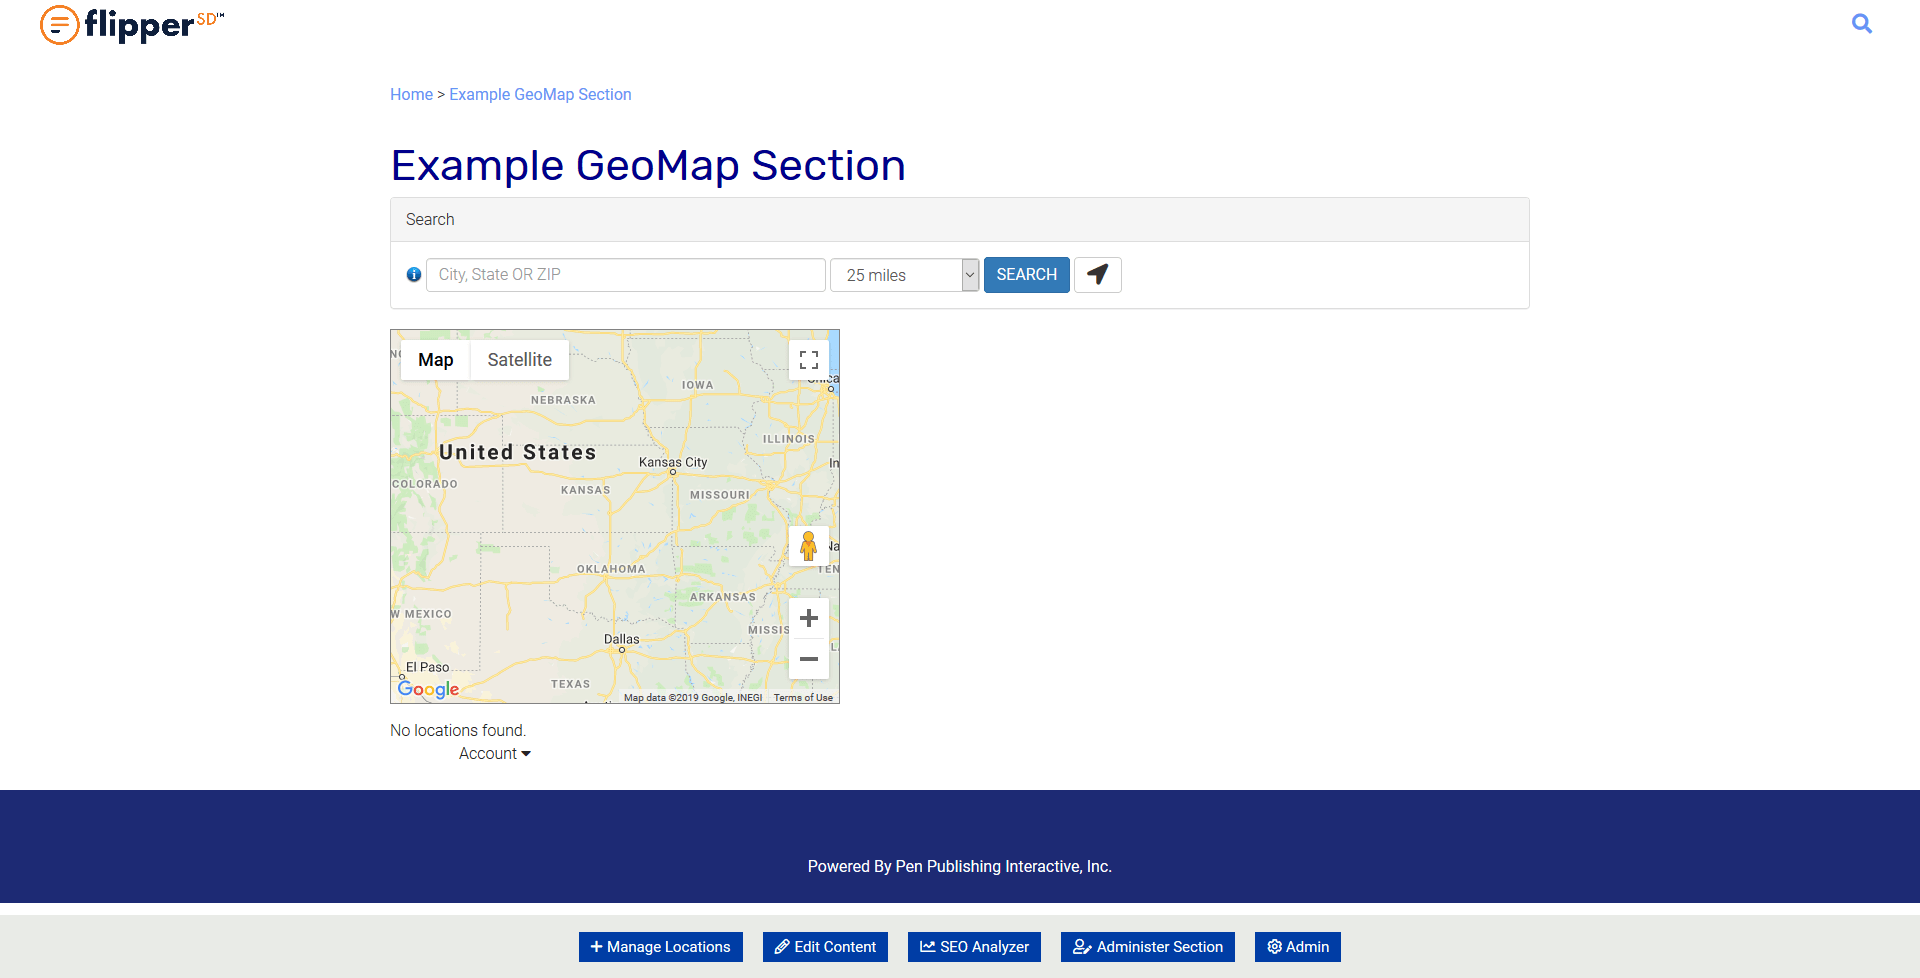 GeoMap-Page View